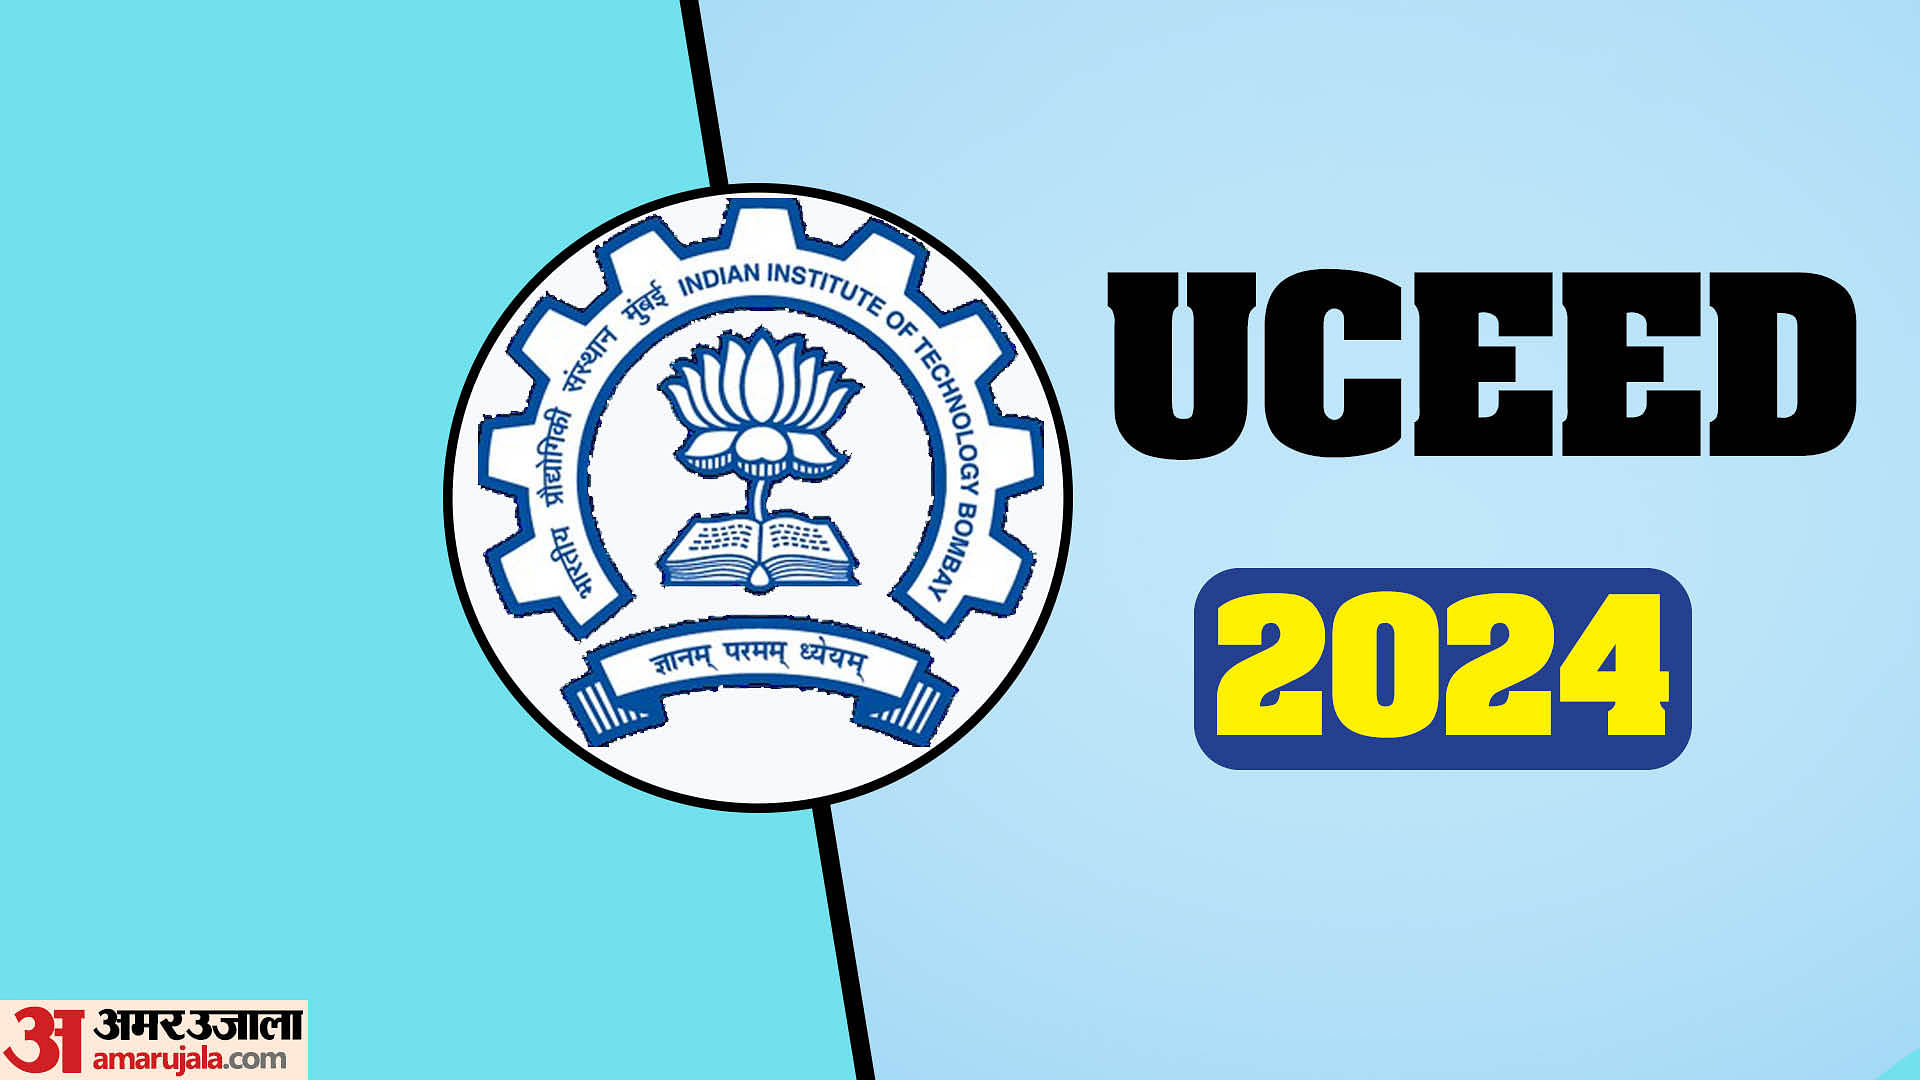 UCEED 2024 seat acceptance window closing today, Apply now at uceed.iitb.ac.in/2024/